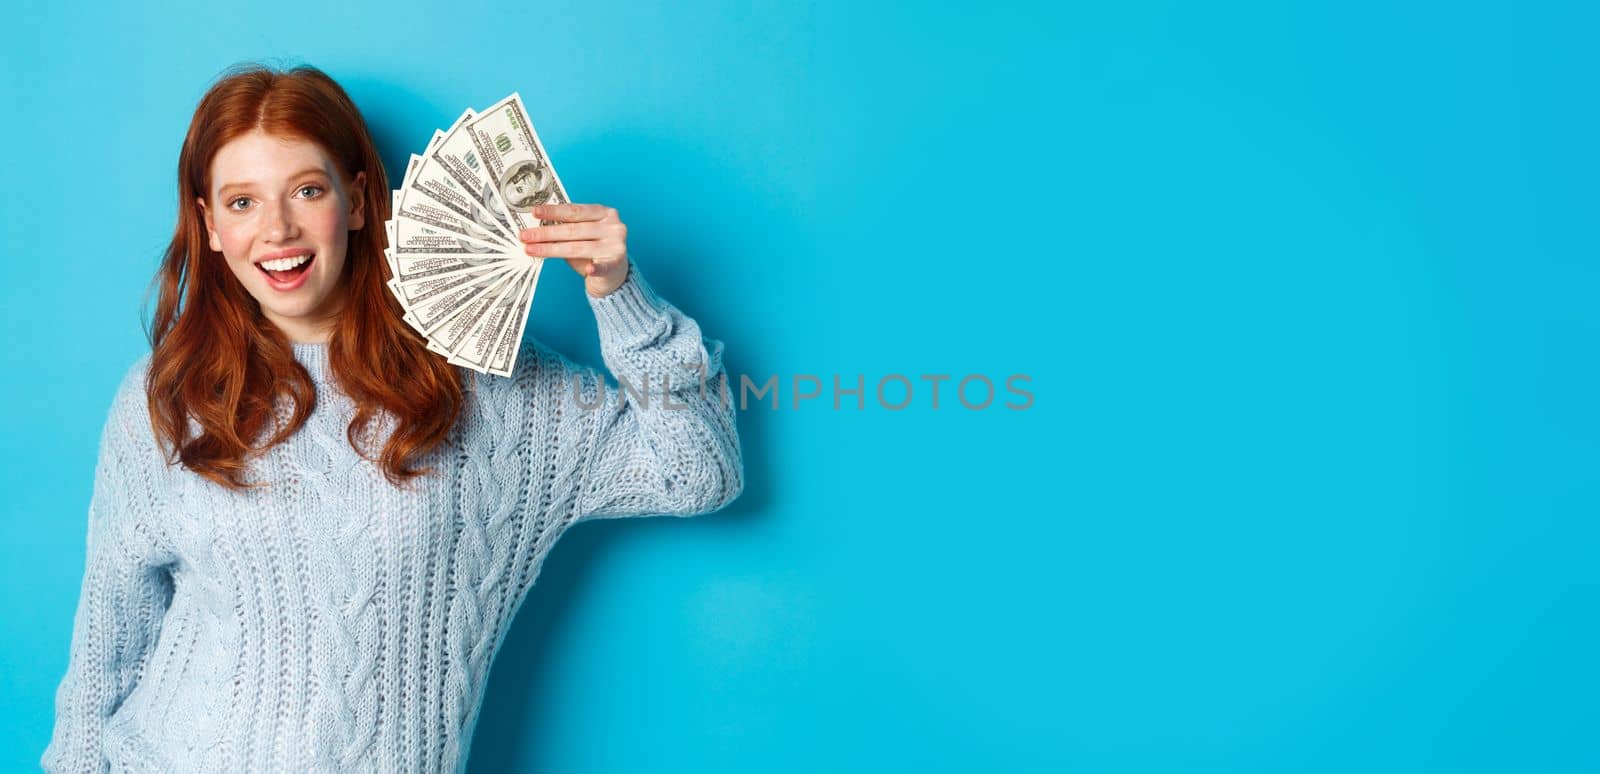 Cheerful redhead woman in sweater showing dollars, smiling pleased and holding money, standing over blue background.